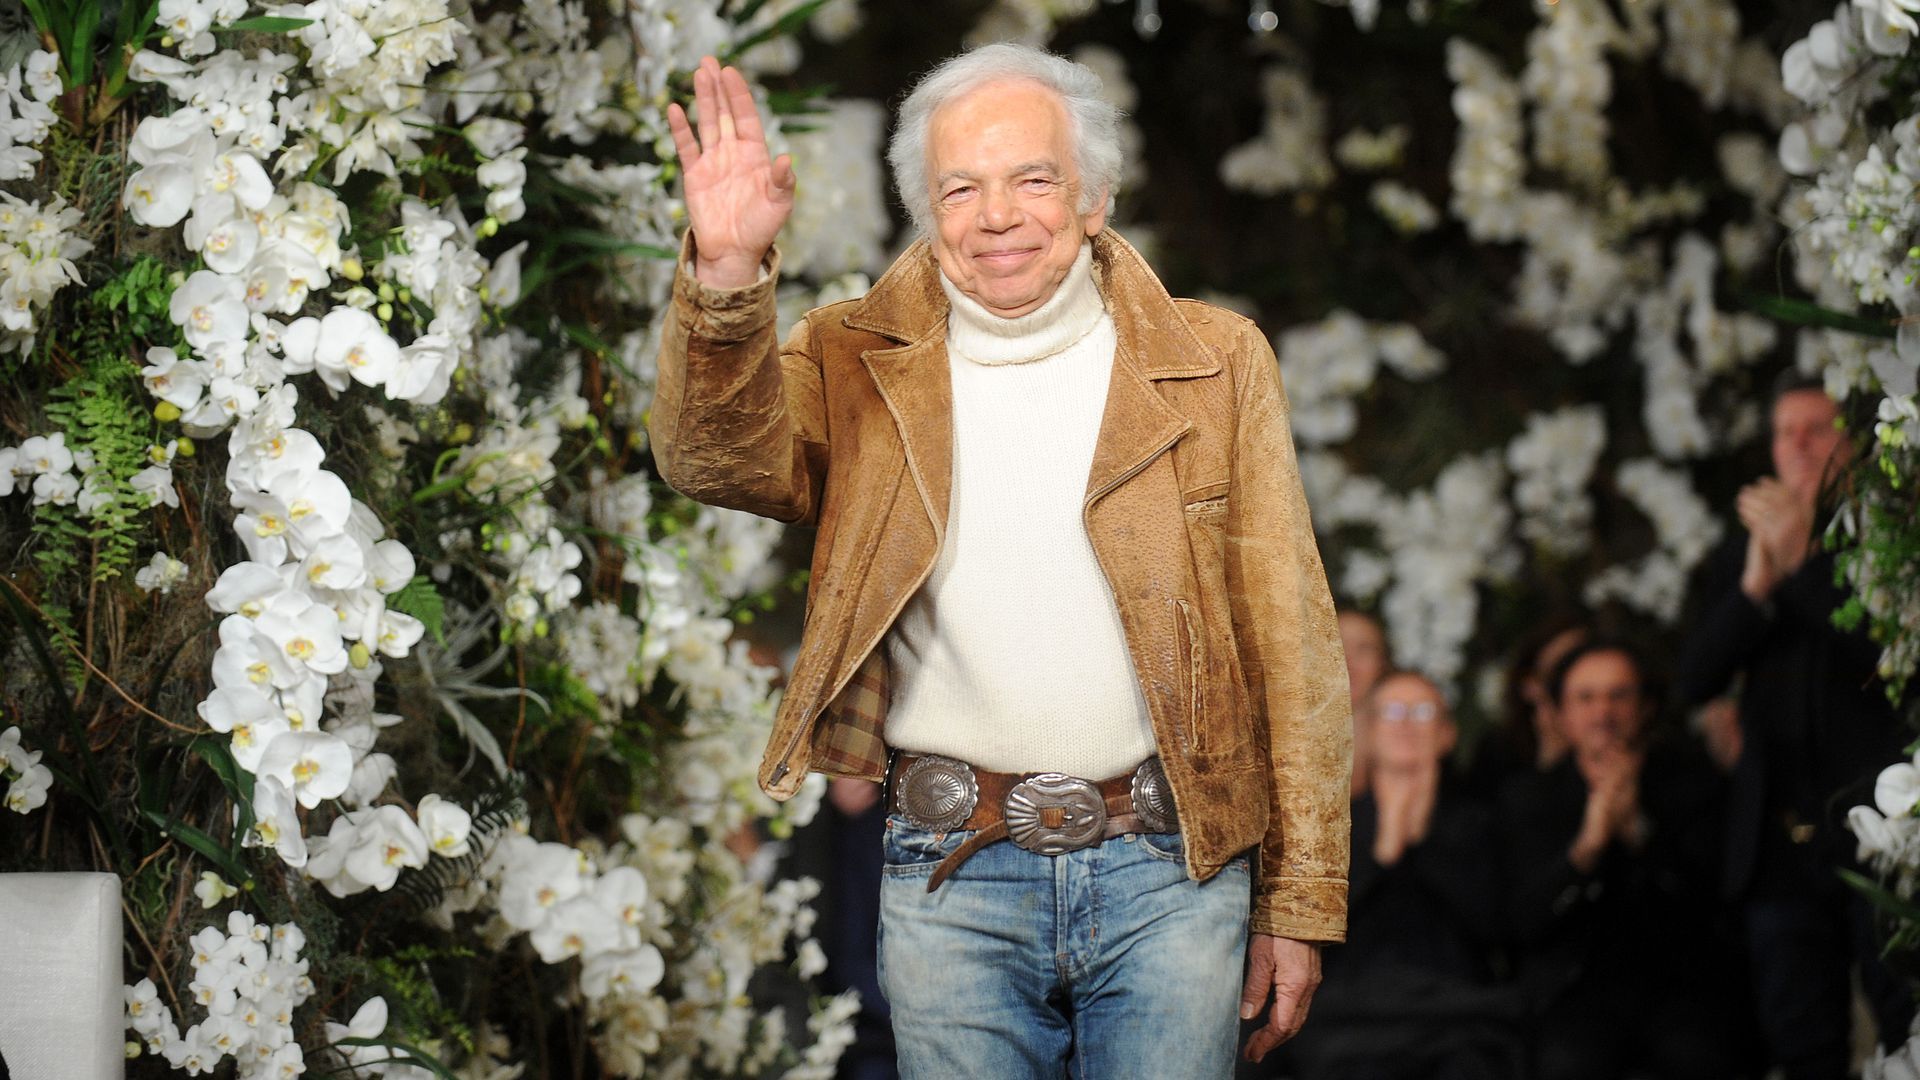 Ralph Lauren waves to the audience at the end of a fashion show. Photo: Desiree Navarro/WireImage